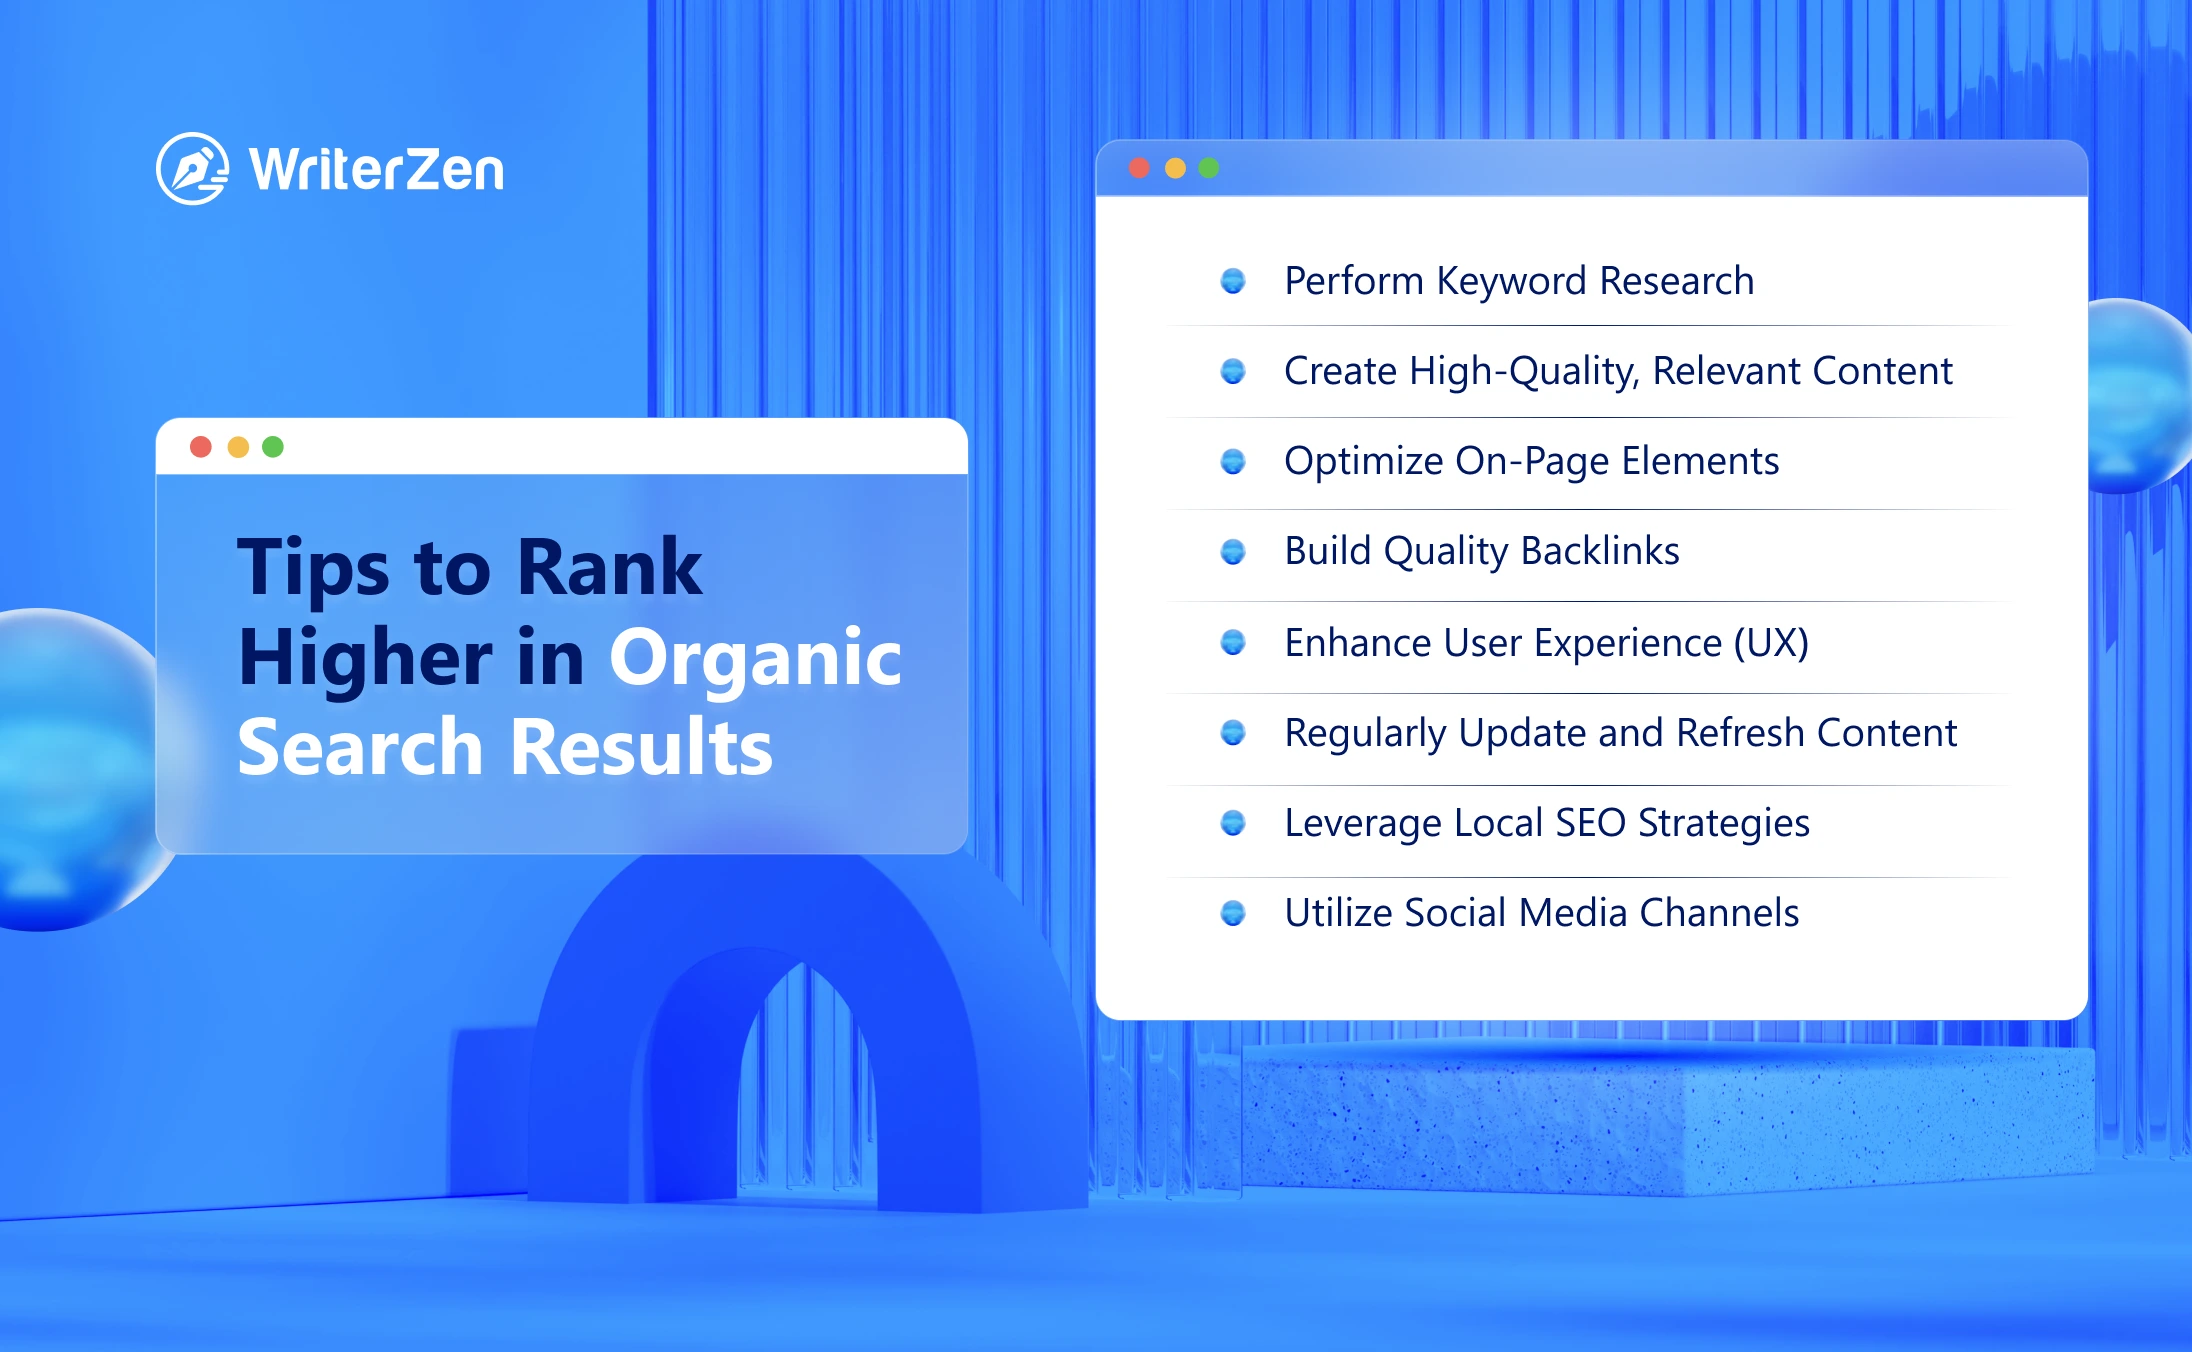 Tips to rank higher in organic search results